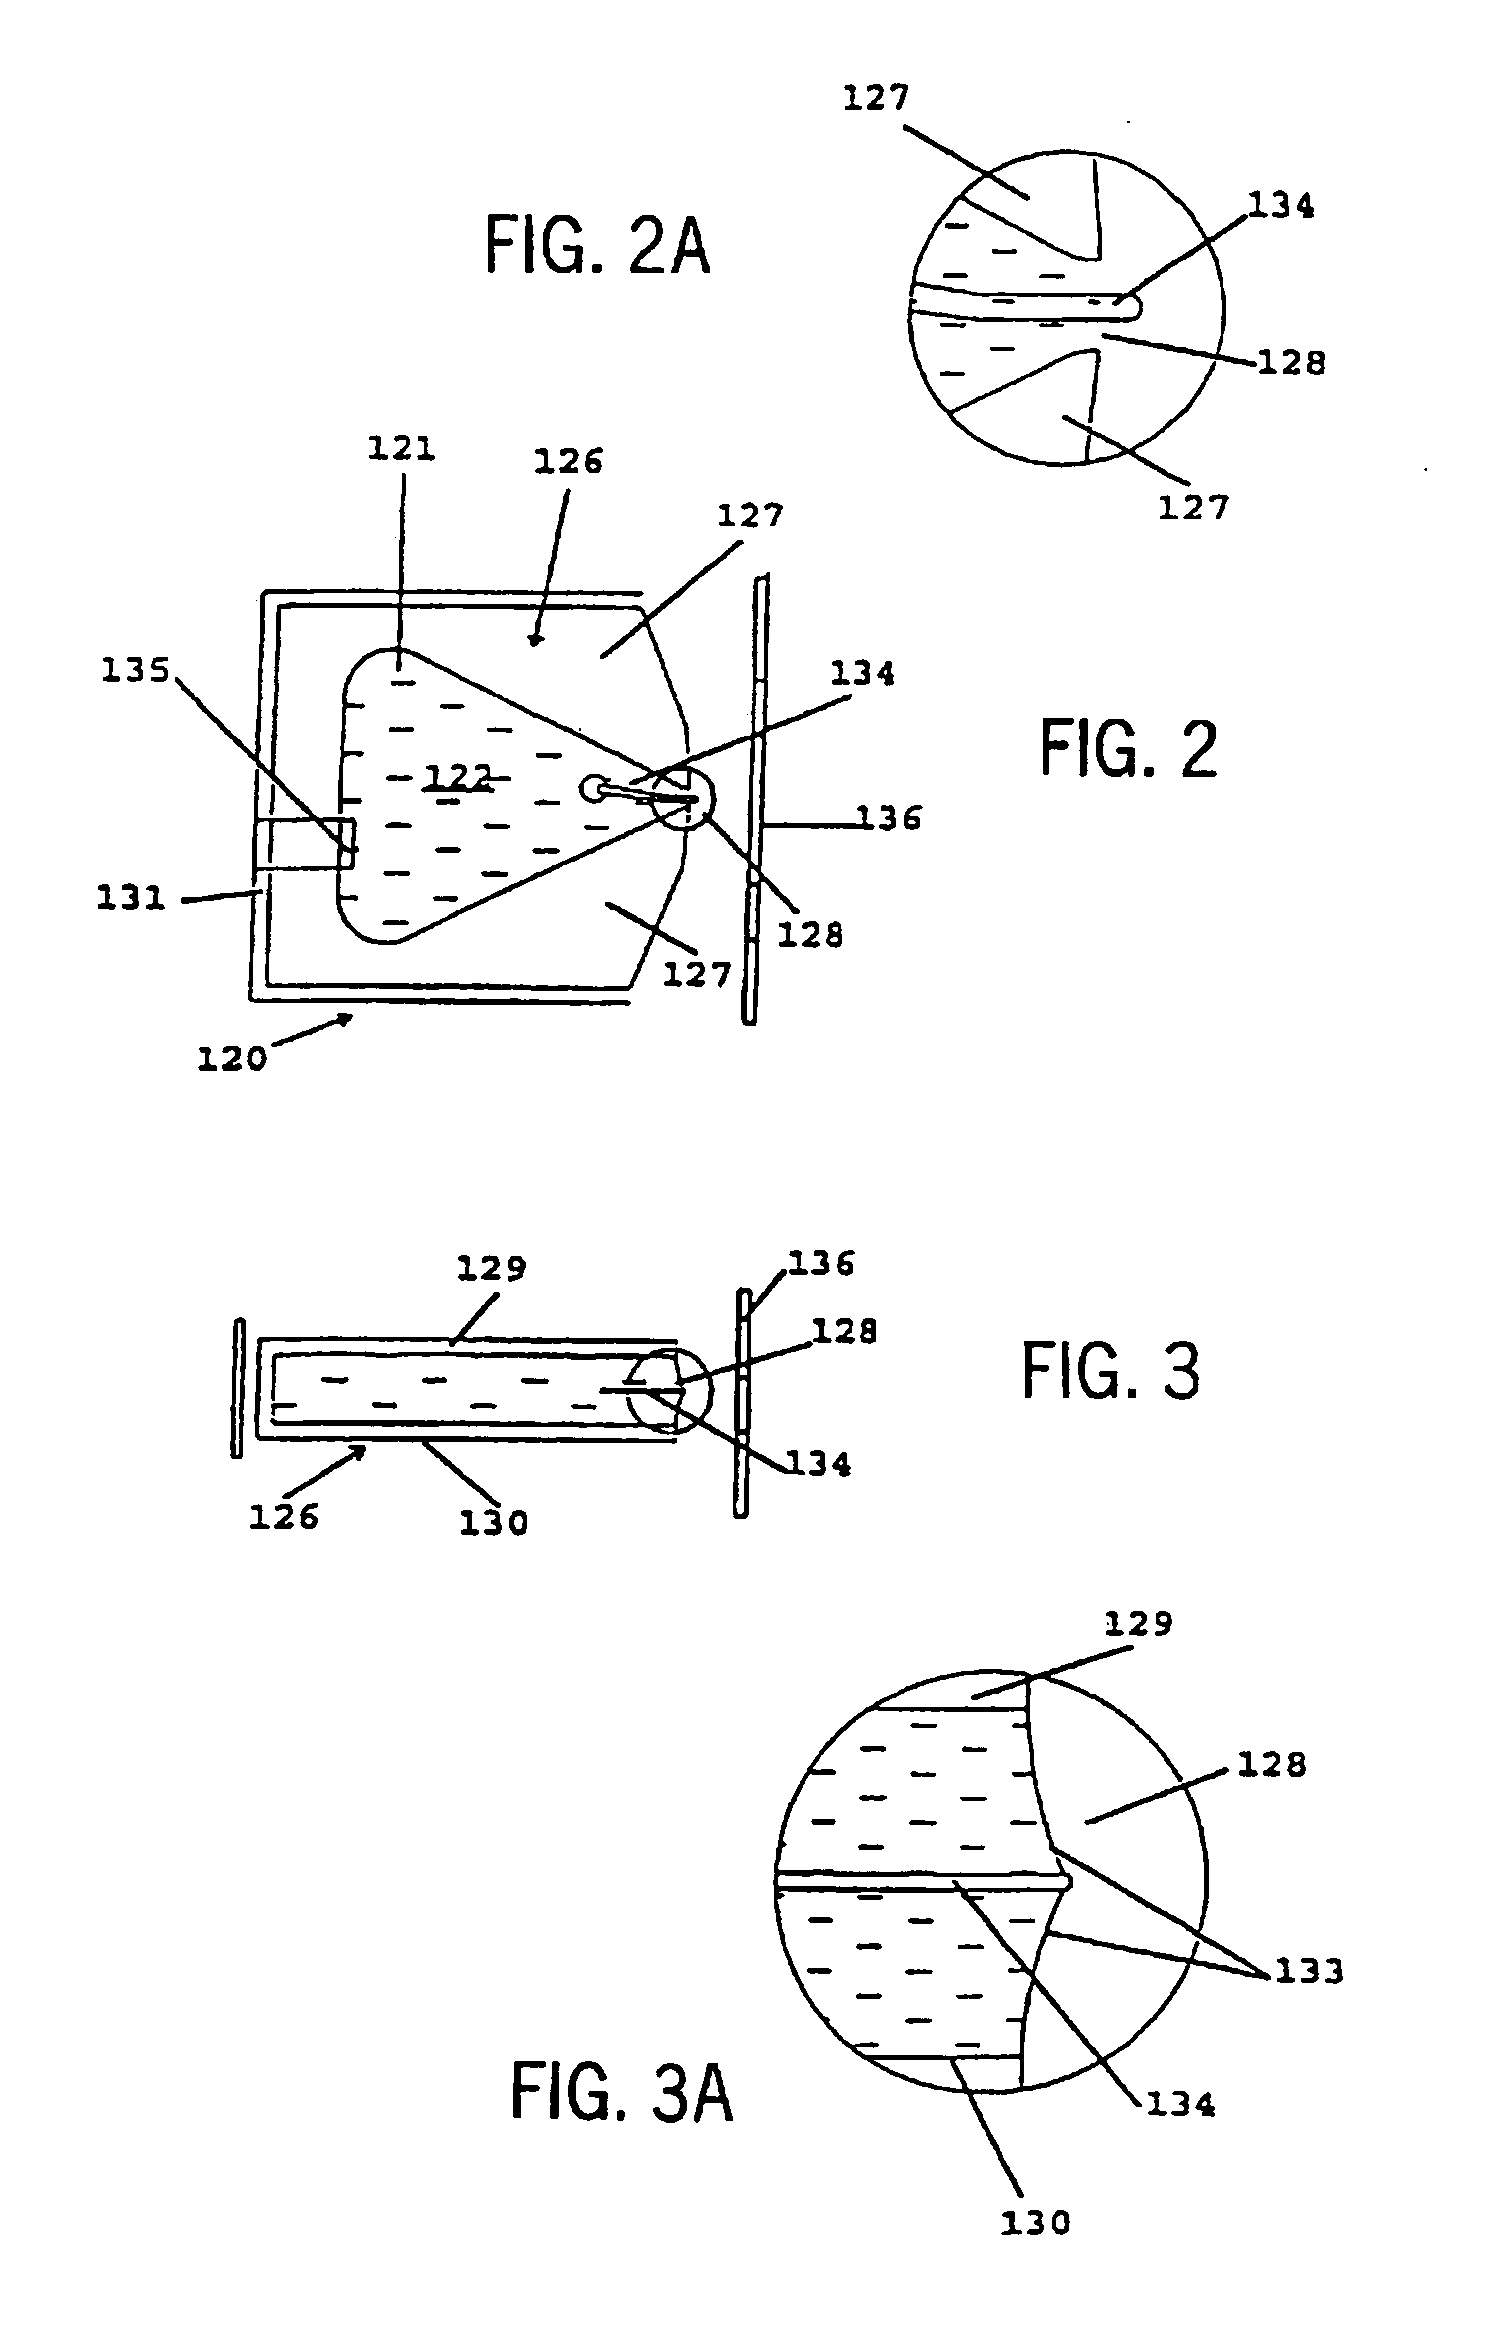 Ink-jet formation of flexographic printing plates